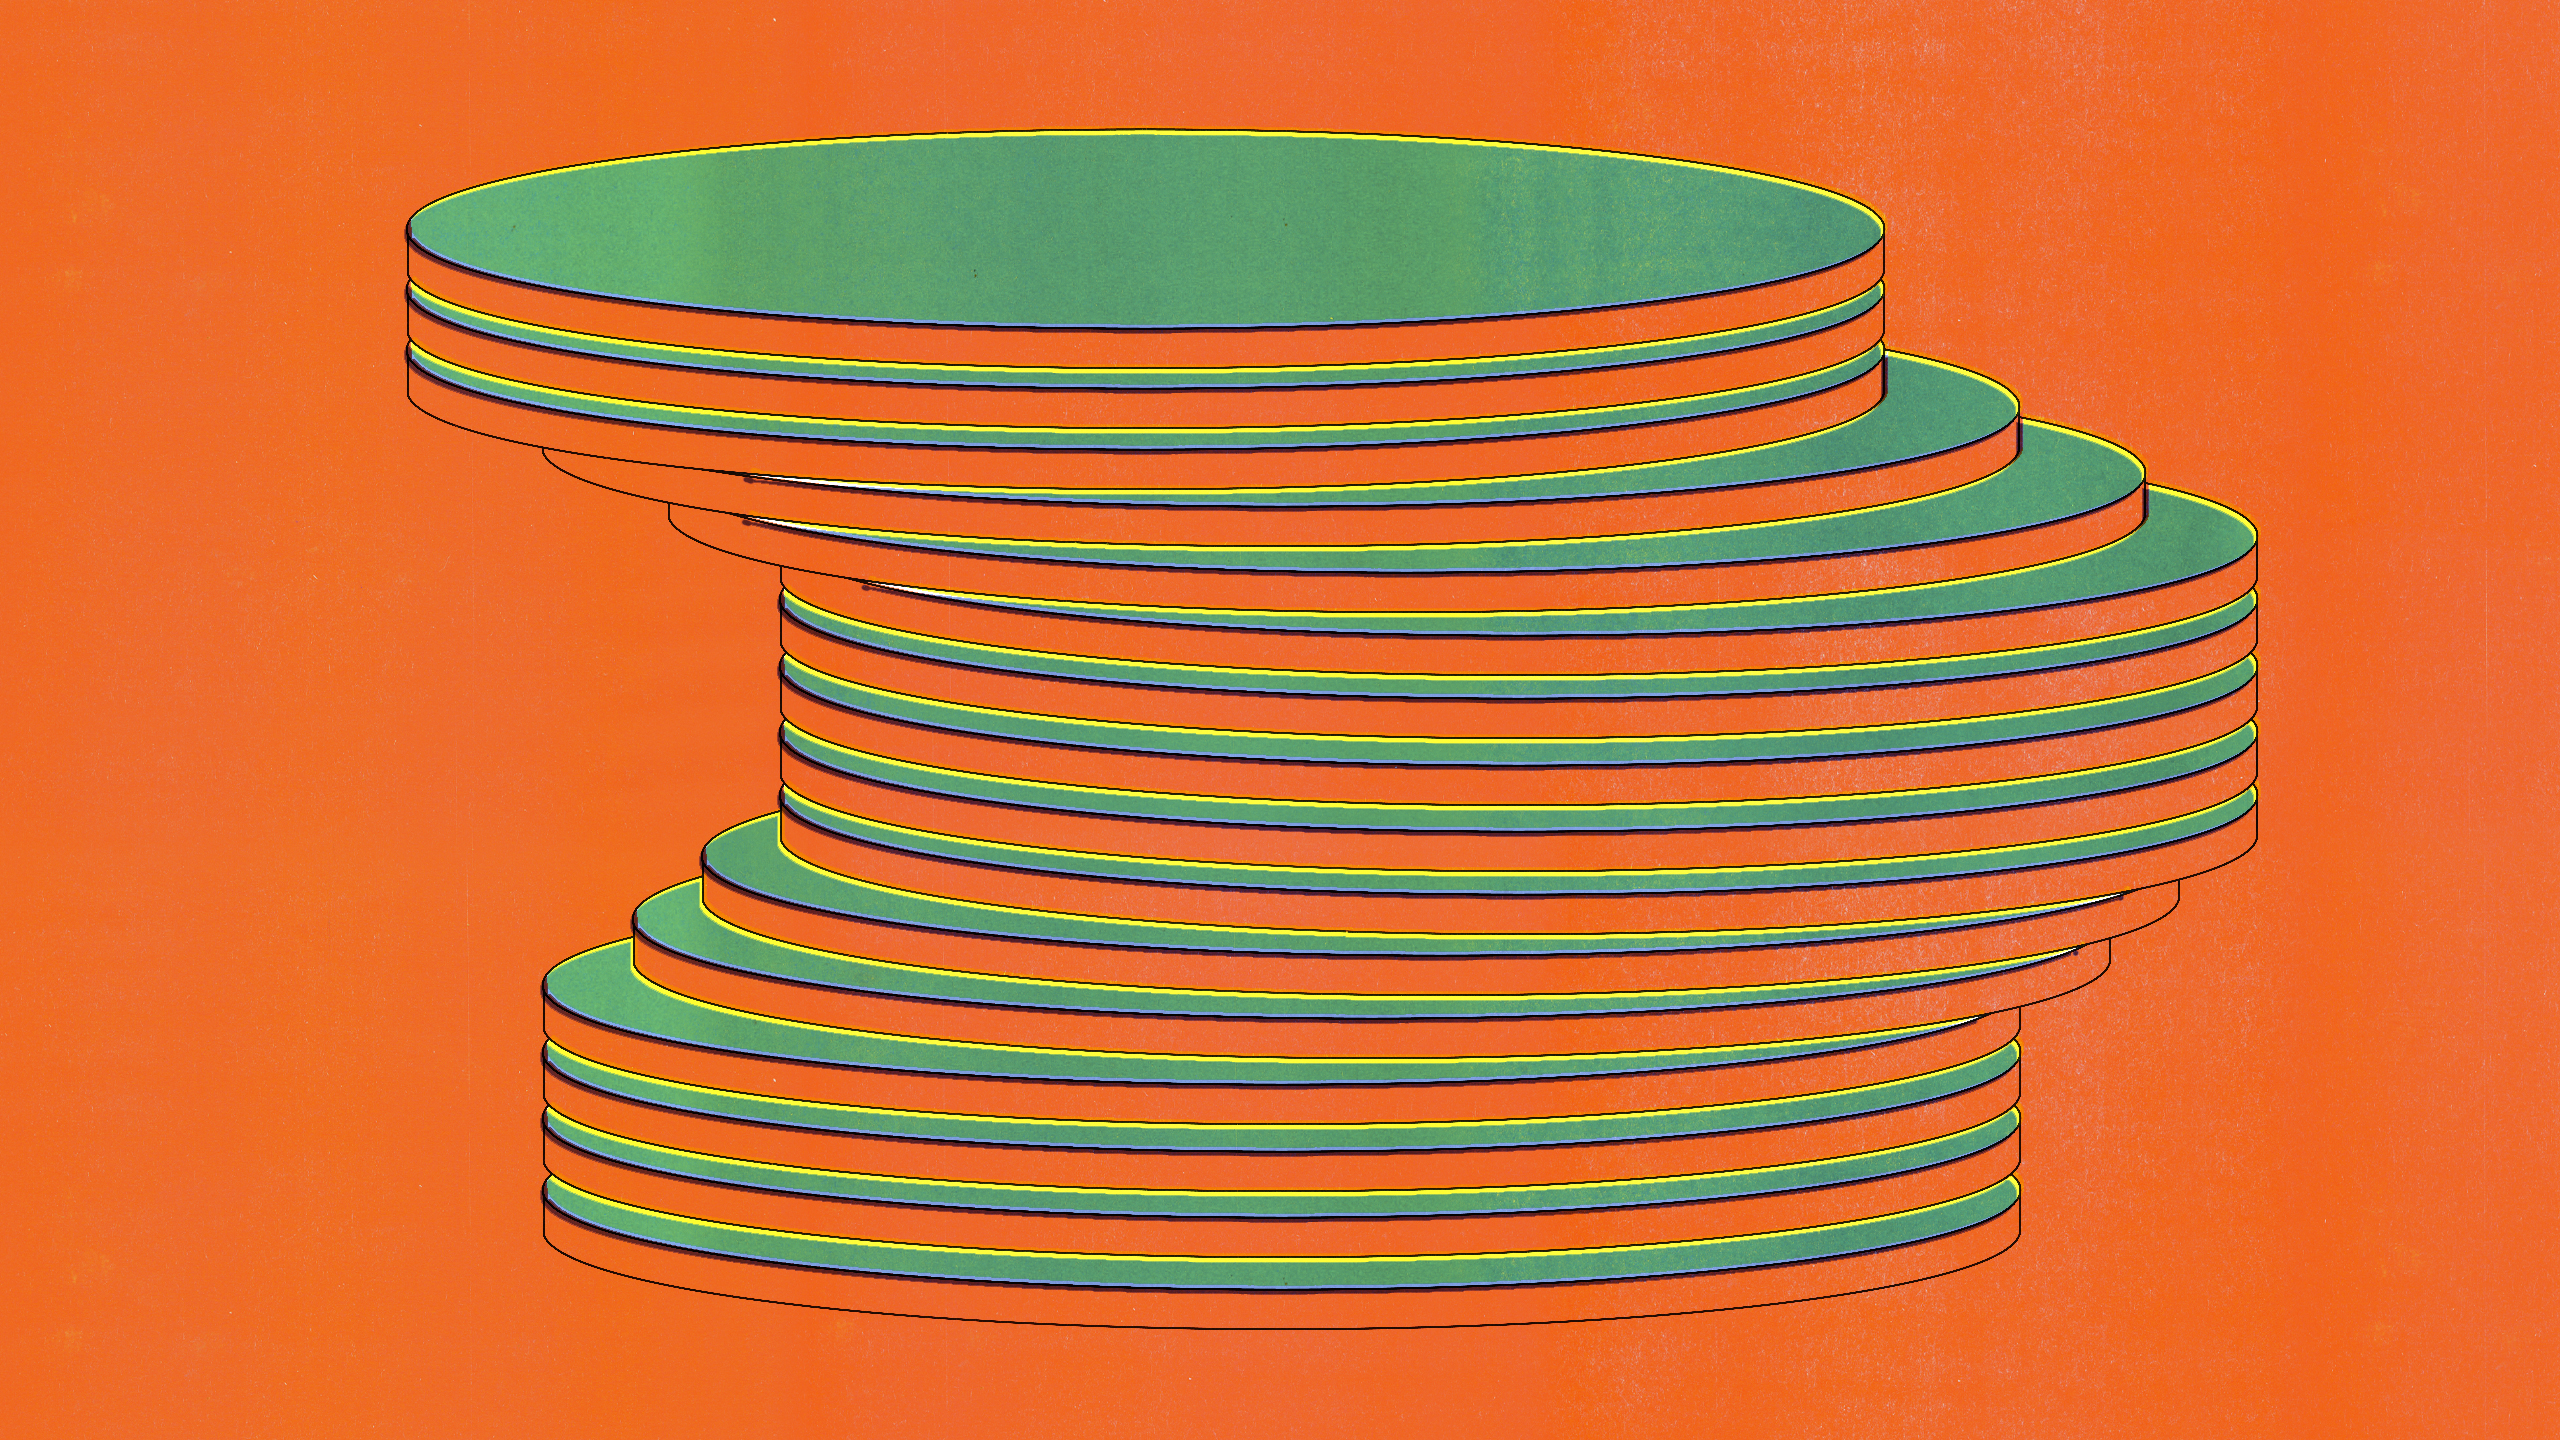 Image of a cylindrical stack of green, yellow, and red striped disks, creating a layered effect, against an orange background.